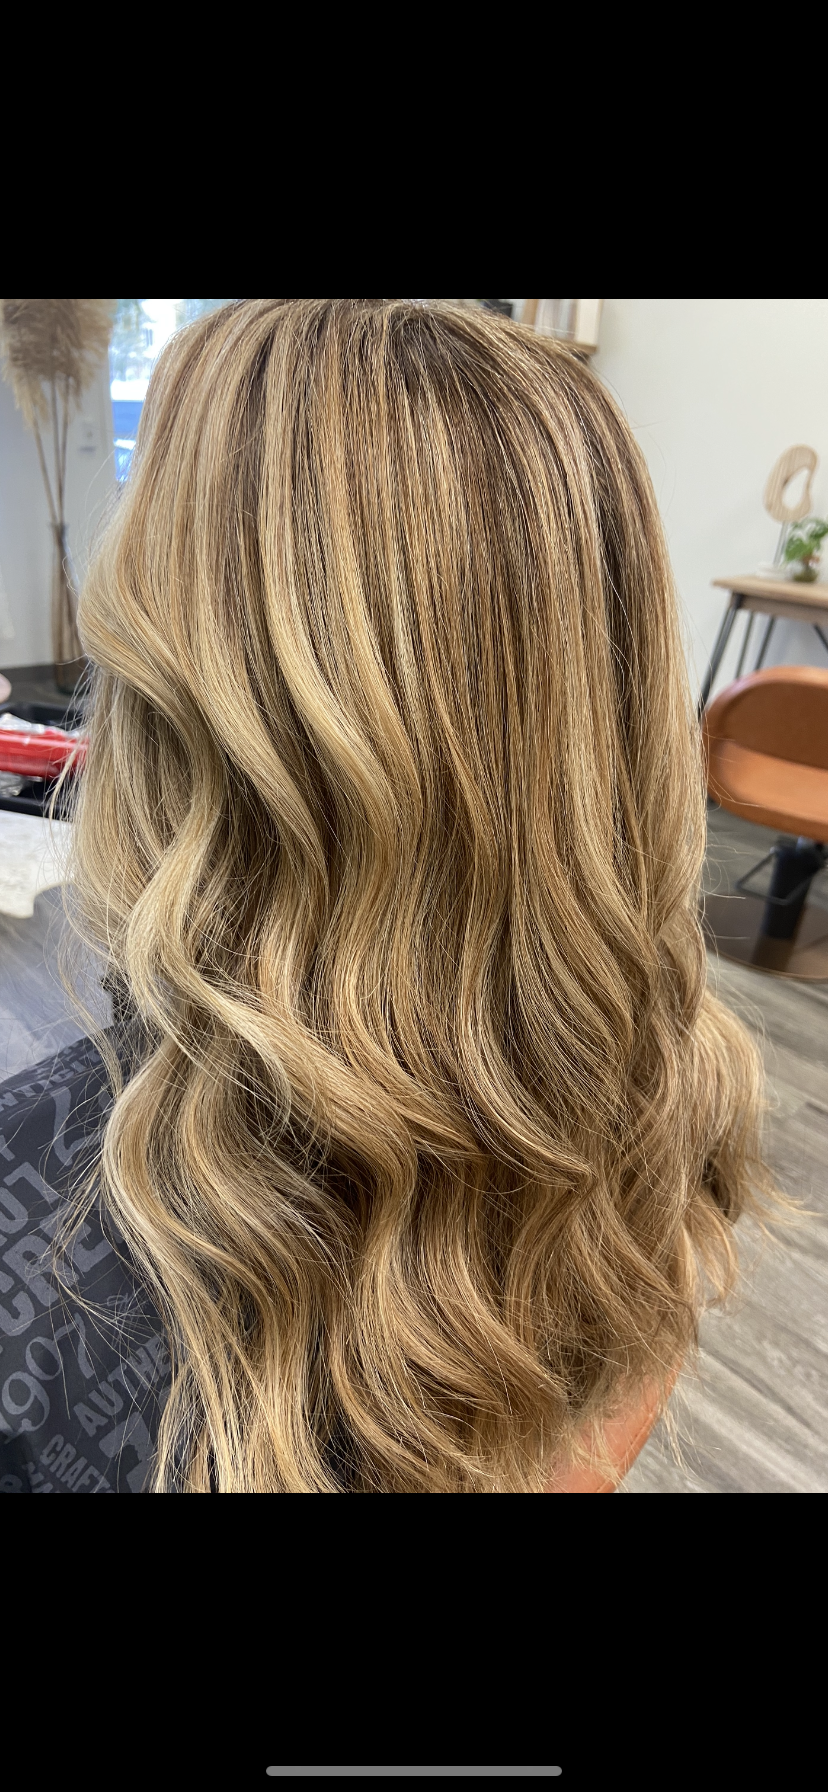 Blowdry style with curls